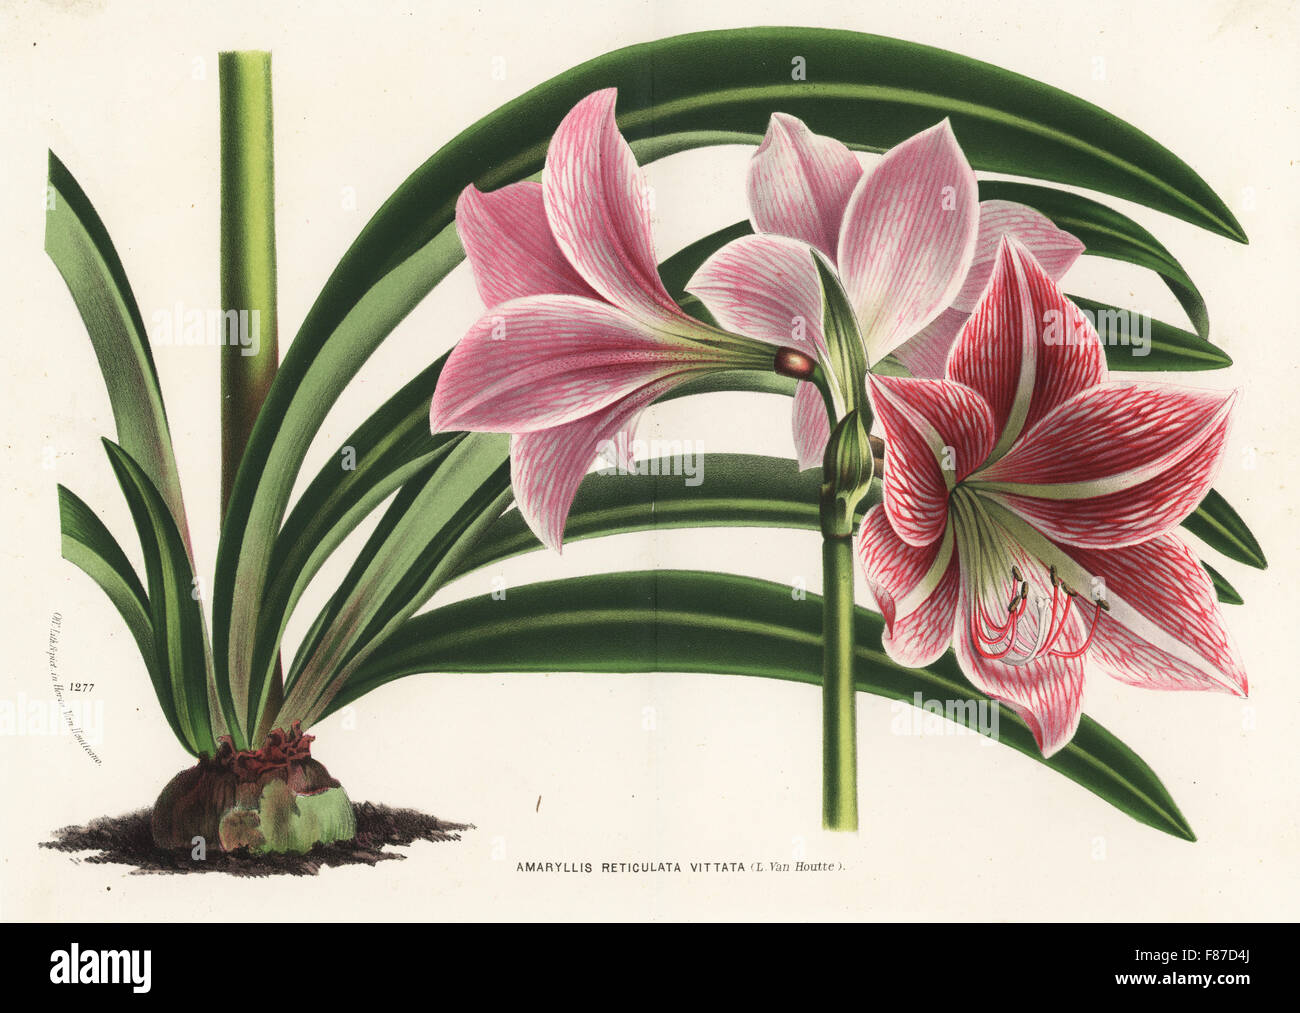 Hippeastrum reticulatum (Amaryllis reticulata vittata). Handcoloured lithograph from Louis van Houtte and Charles Lemaire's Flowers of the Gardens and Hothouses of Europe, Flore des Serres et des Jardins de l'Europe, Ghent, Belgium, 1870. Stock Photo